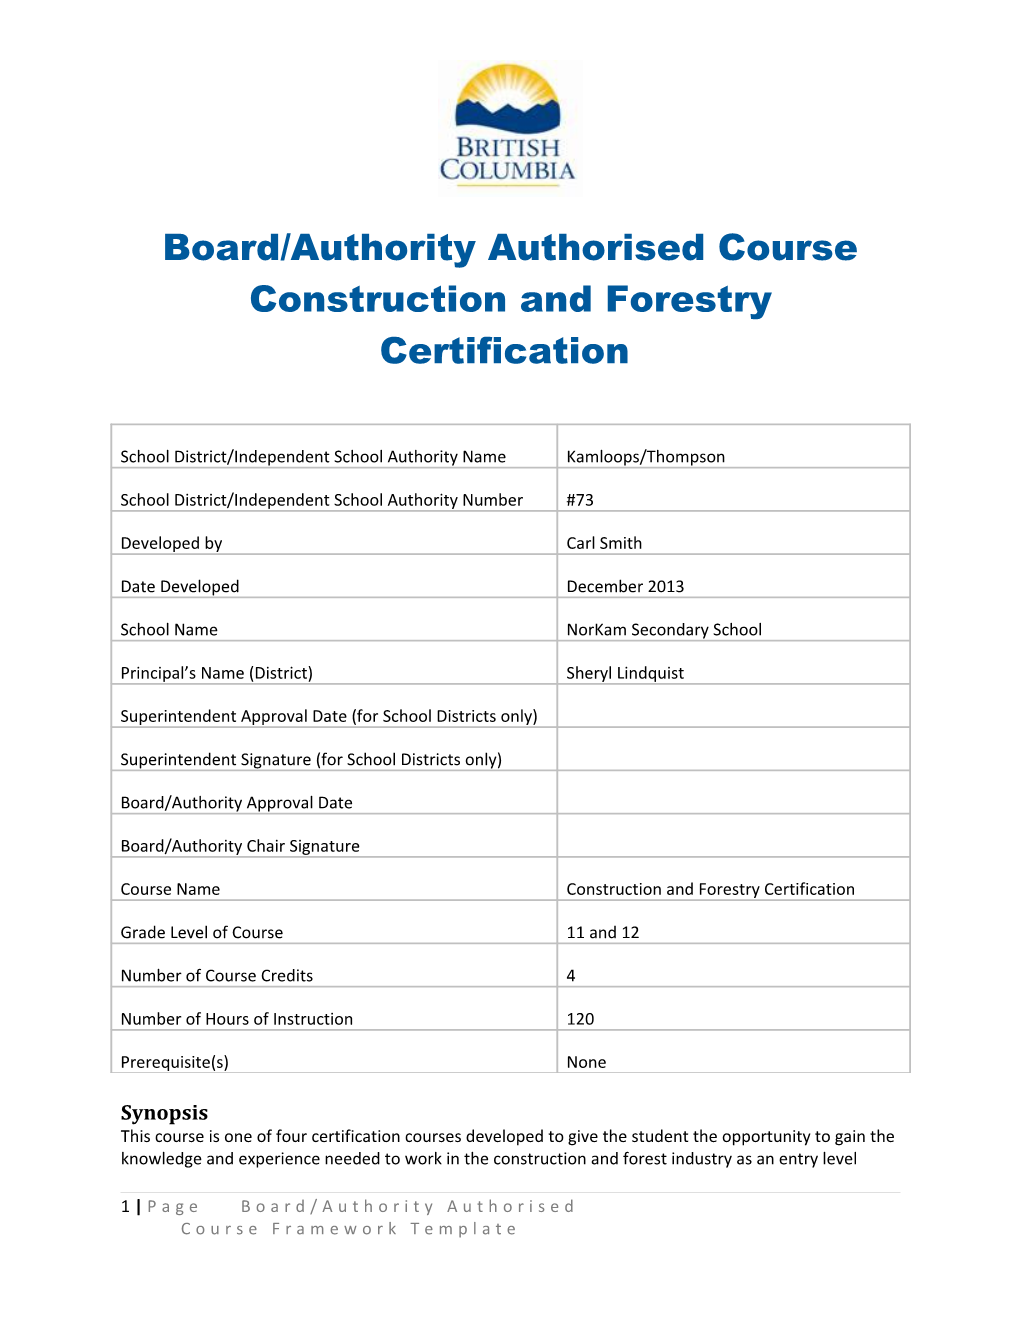 Board/Authority Authorised Course Framework Template